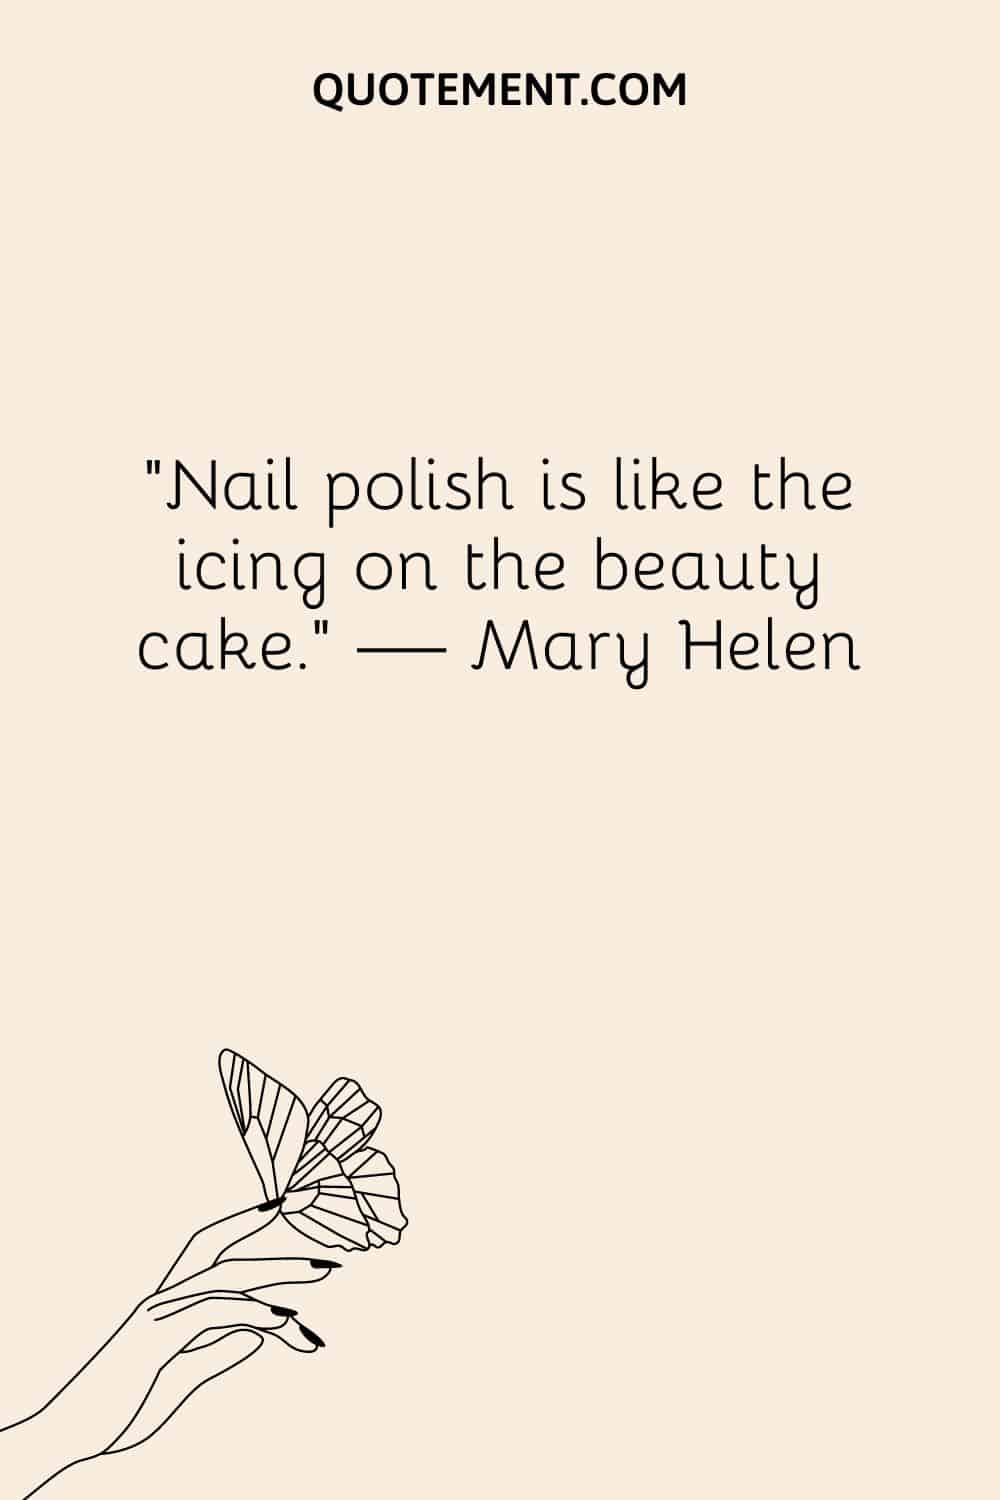 Nail polish is like the icing on the beauty cake